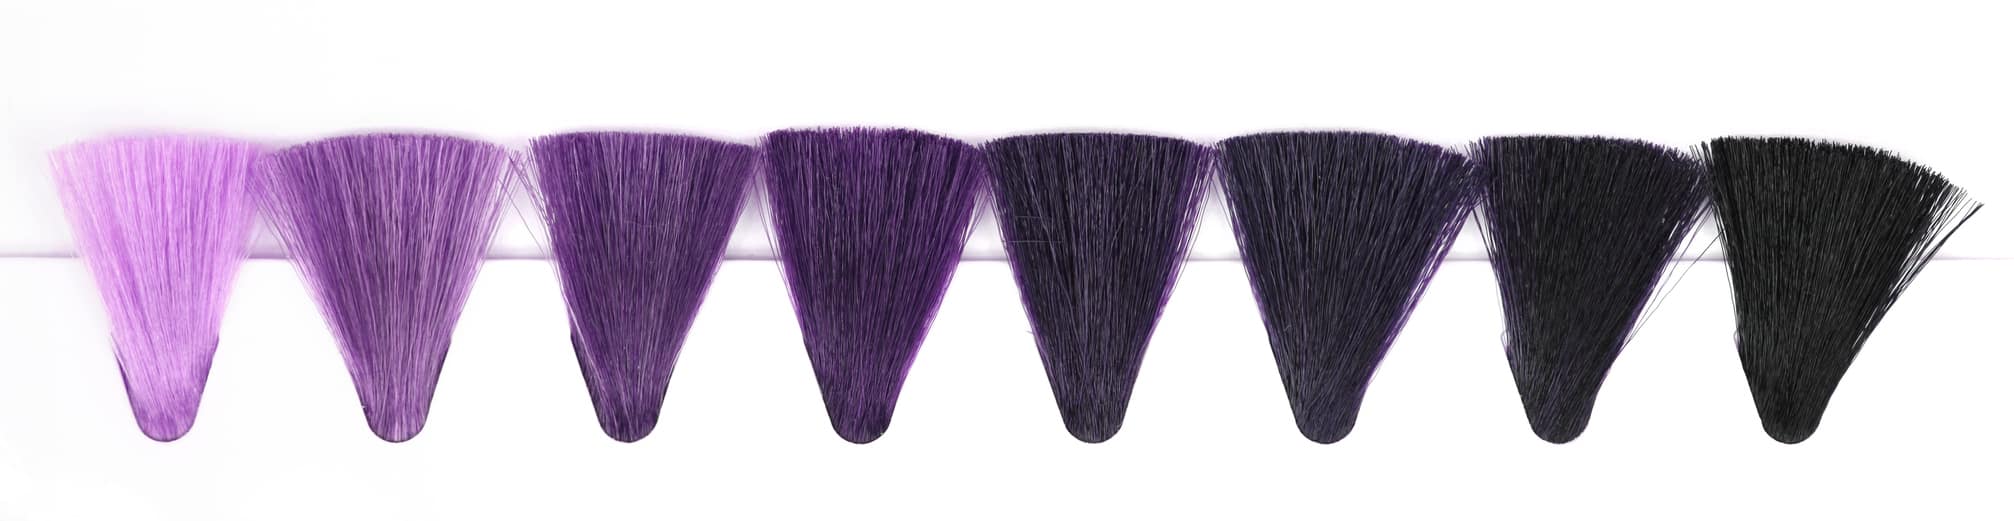 Purple Hair Color Swatches